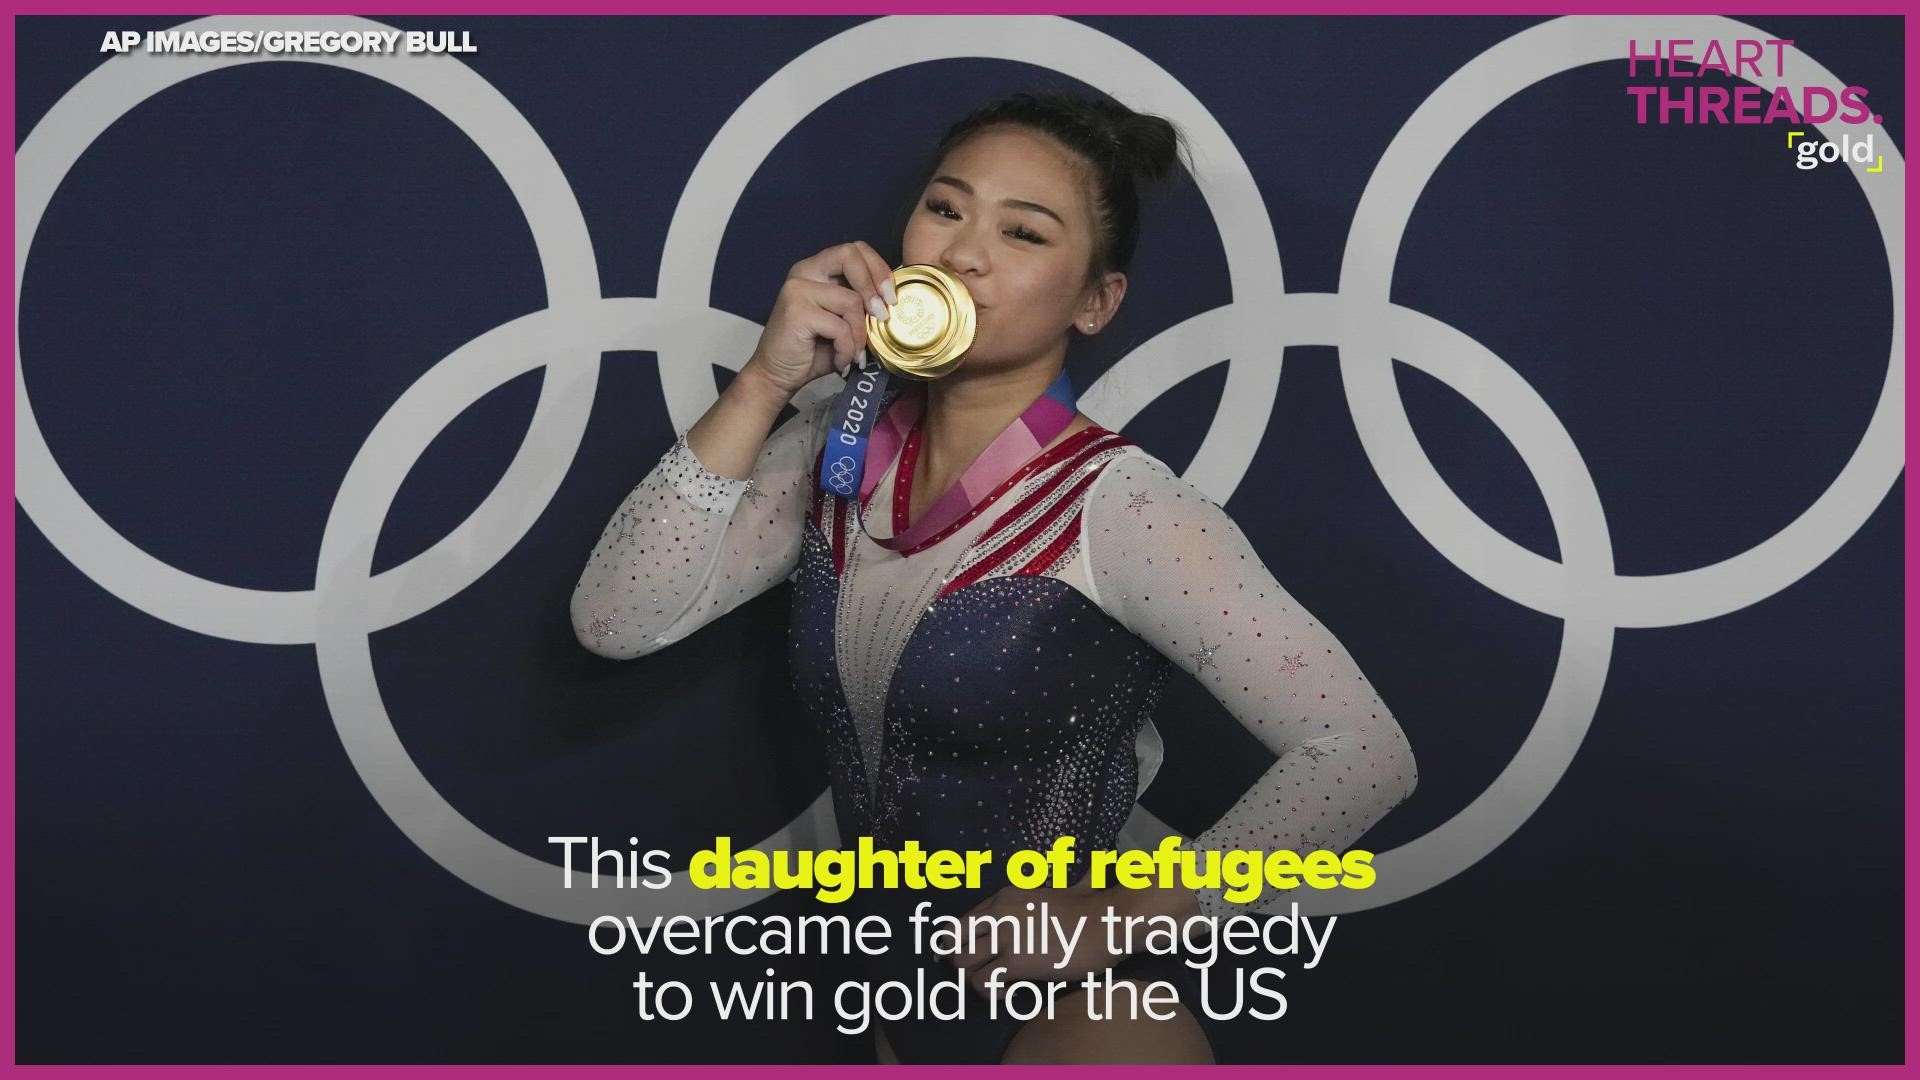 After a tragic accident left her dad paralyzed, Suni Lee made him proud by winning Olympic gold